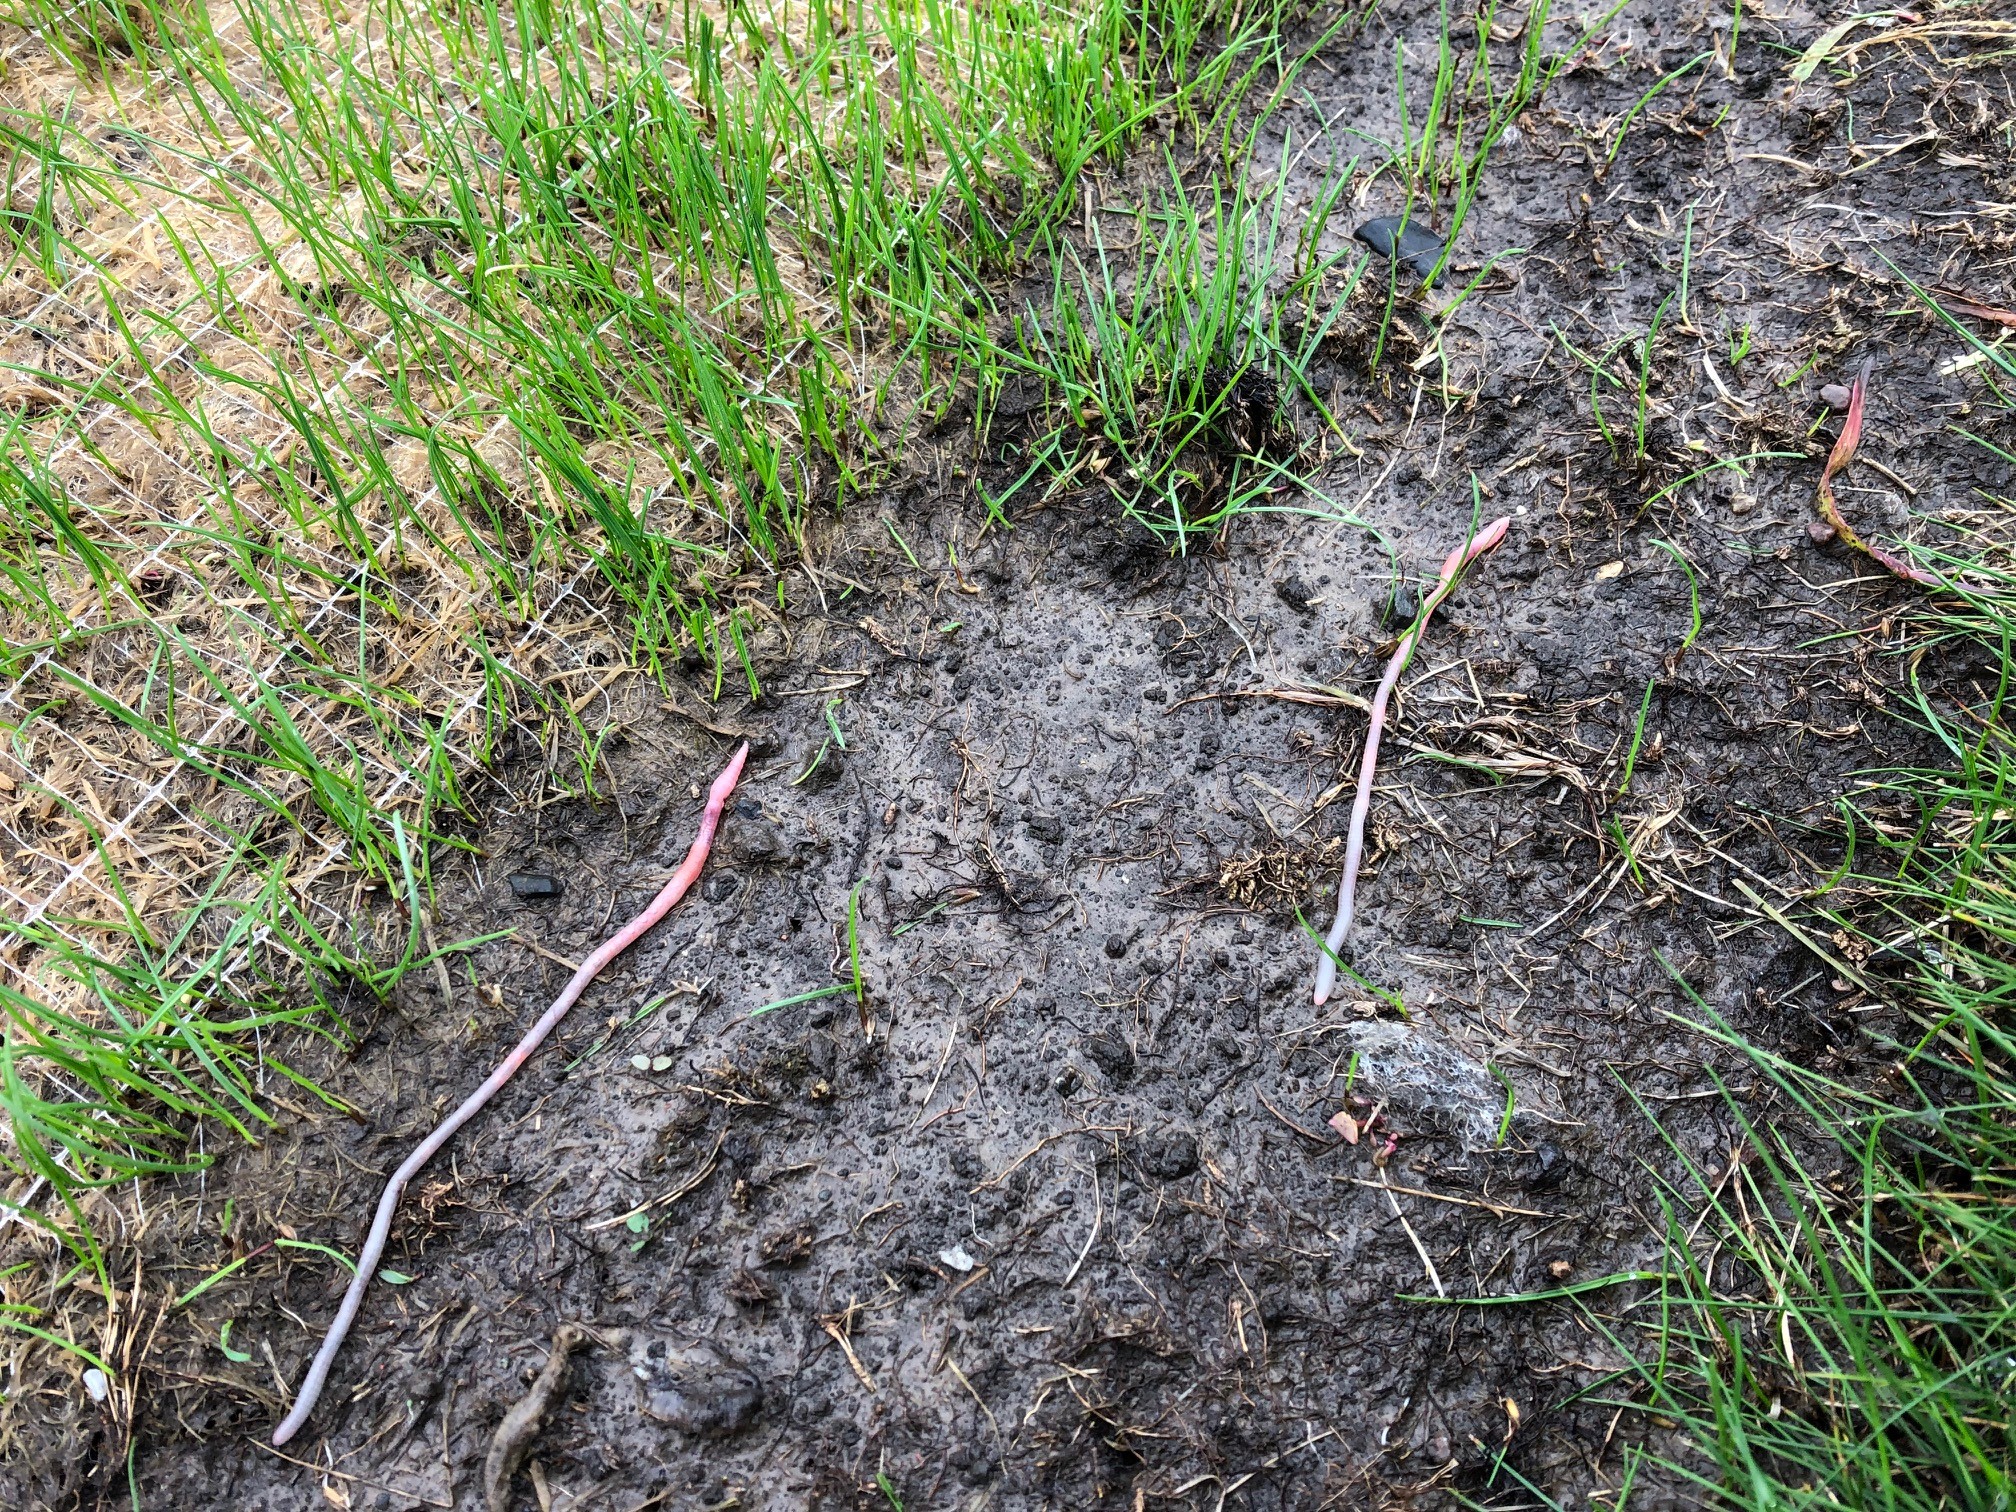 Two earthworms crawling over bare soil